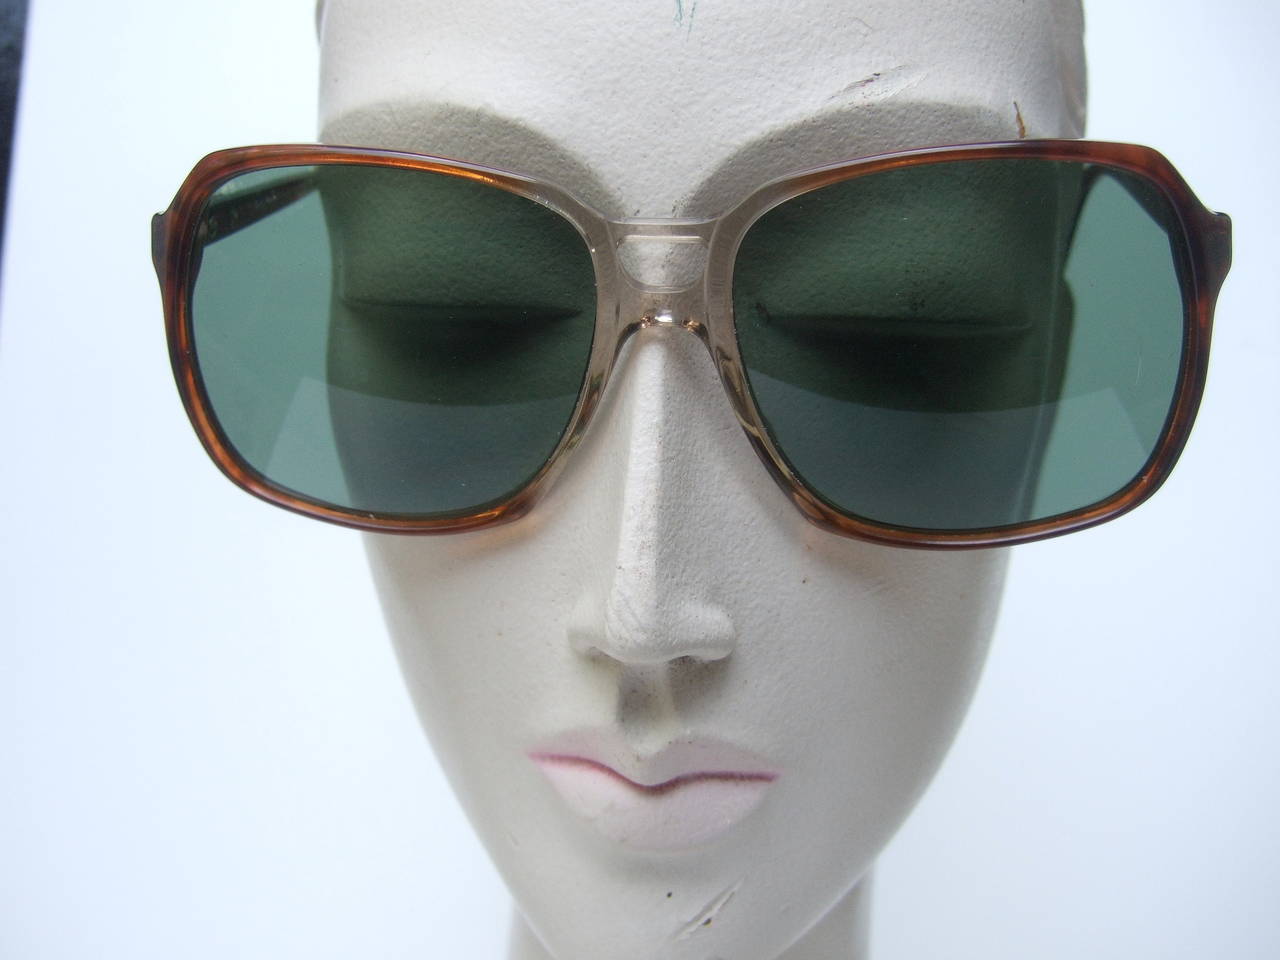 YVES SAINT LAURENT Green tinted tortoise shell sunglasses in YSL case 
The stylish mod sunglasses are designed with large tinted green plastic lenses The tortoise shell lucite frames are stamped YSL on both exterior sides with gilt metal plates.